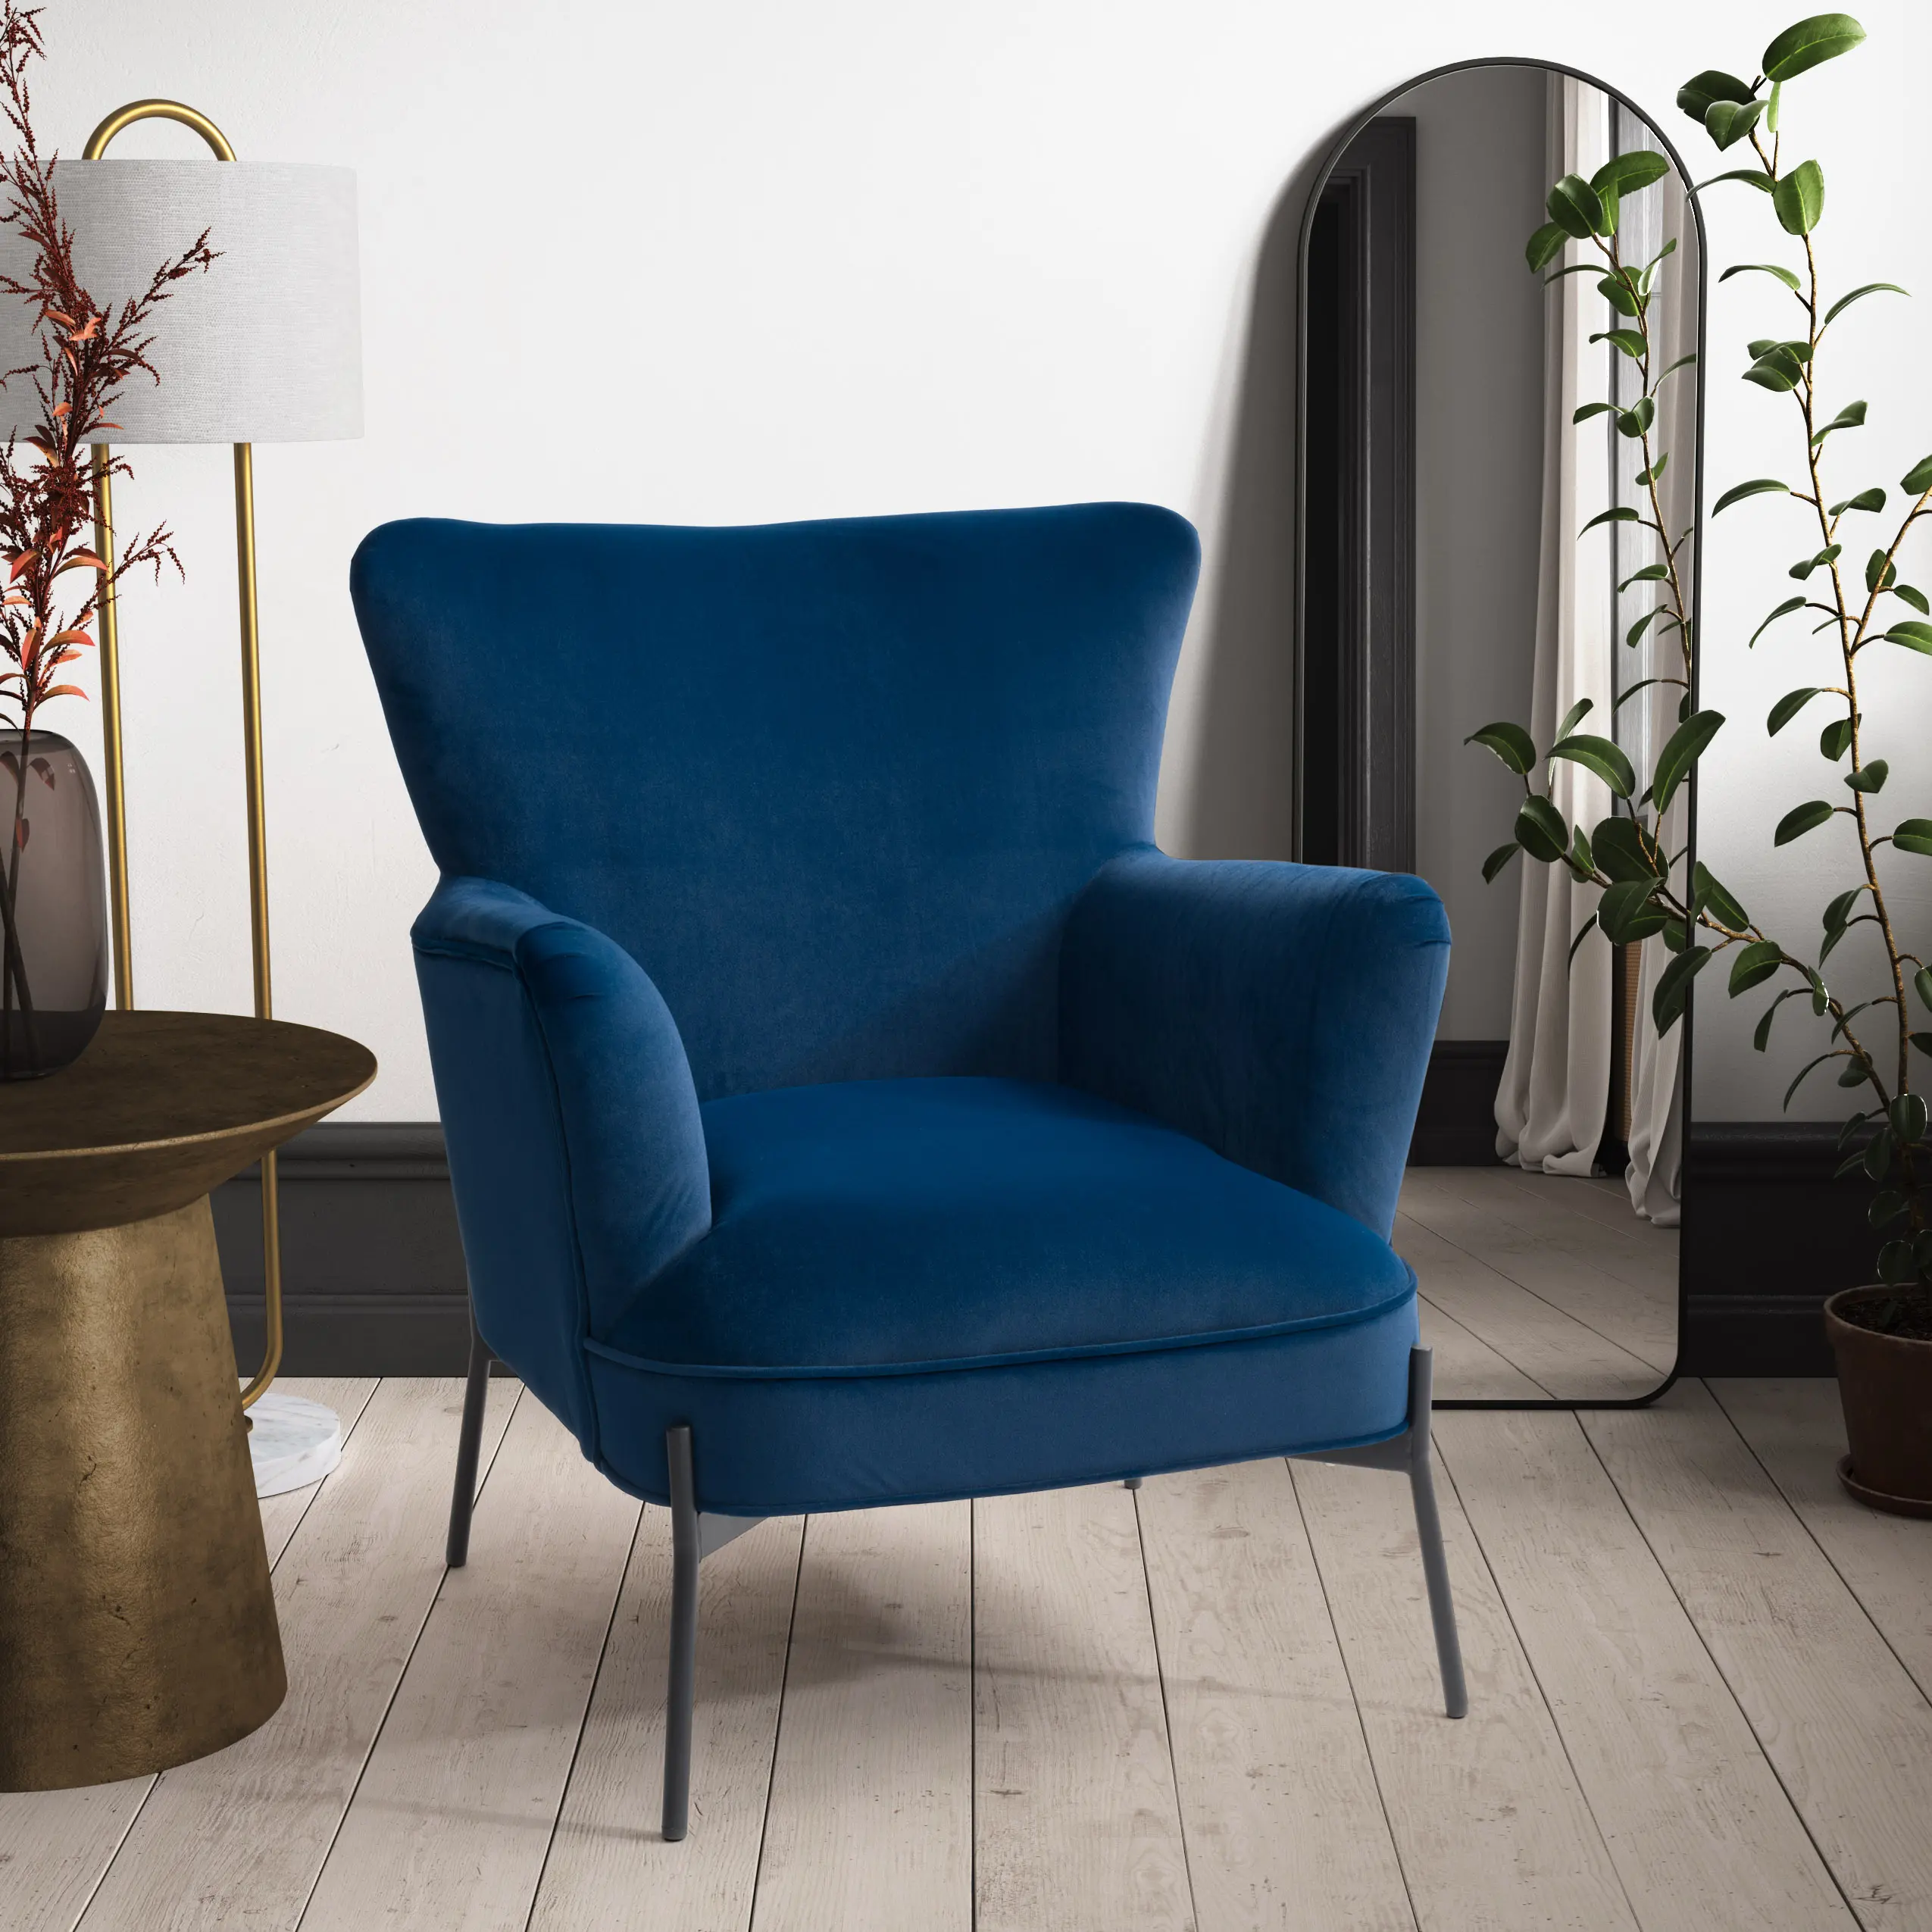 The Blue Wingback Rocking Armchair/ Nursing Chair // Schaukelstuhl/ Sessel  / Choice of Upholstery Color 